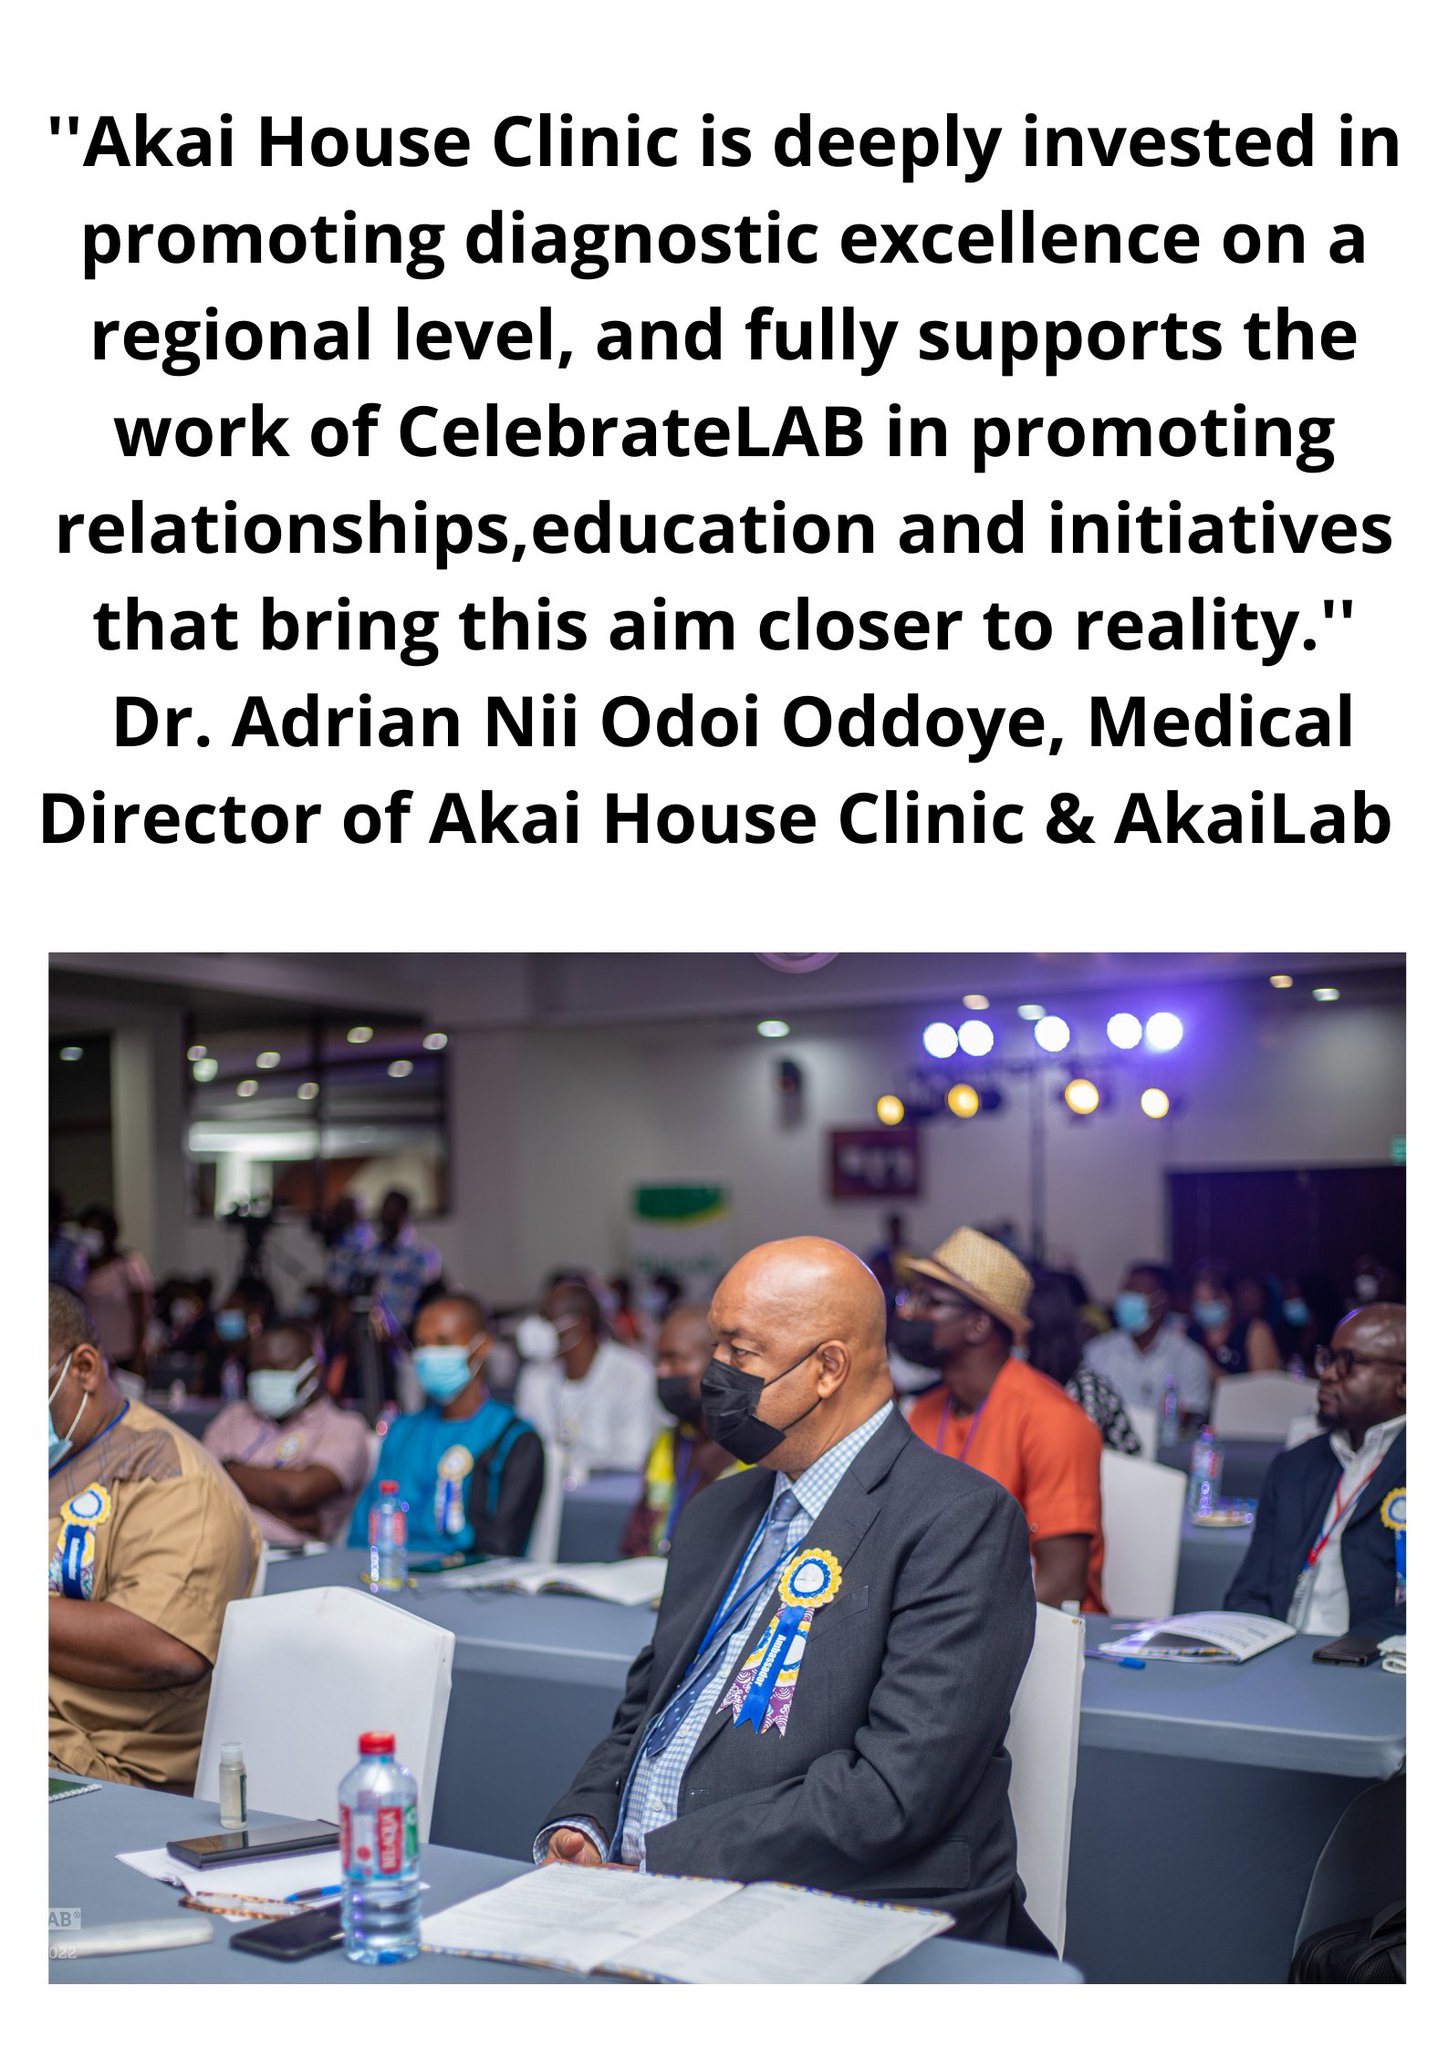 CelebrateLAB® West Africa on X: Dr. Adrian Nii Odoi Oddoye, Medical  Director of Akai House Clinic & AkaiLab stated in his welcome address on  the occasion of the 8th Annual CelebrateLab West